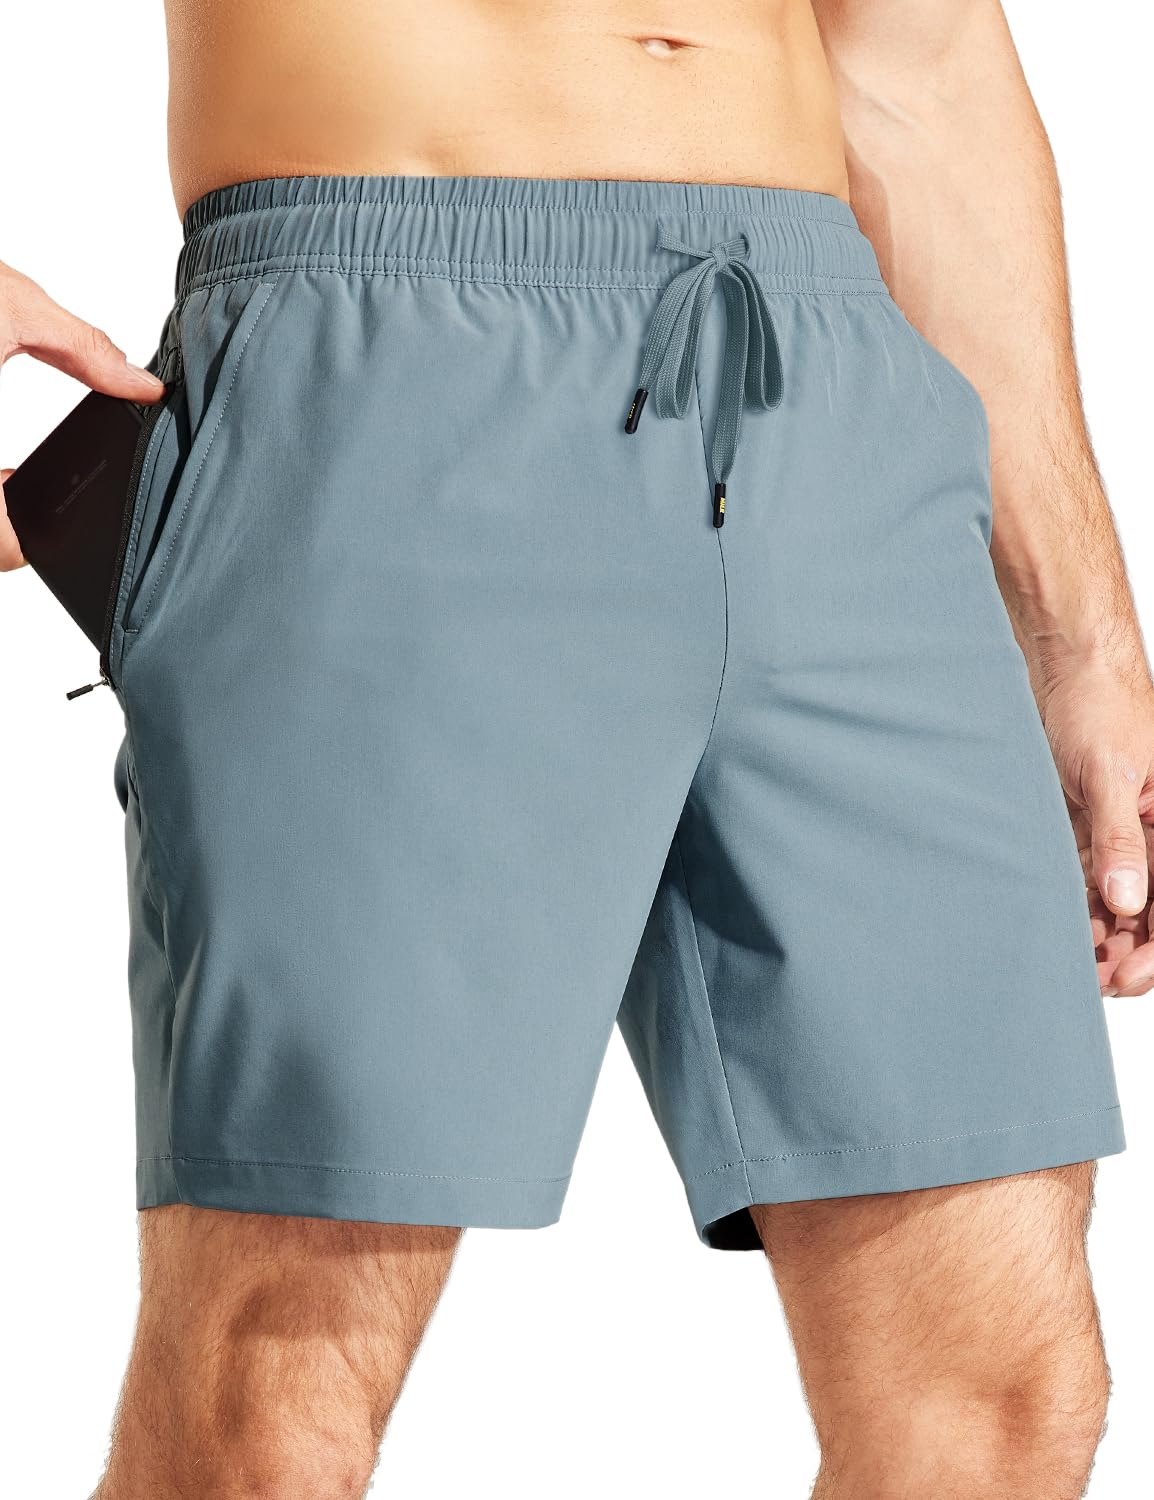 Men's 7 Inch Quick-Dry Running Shorts with Zipper Pockets